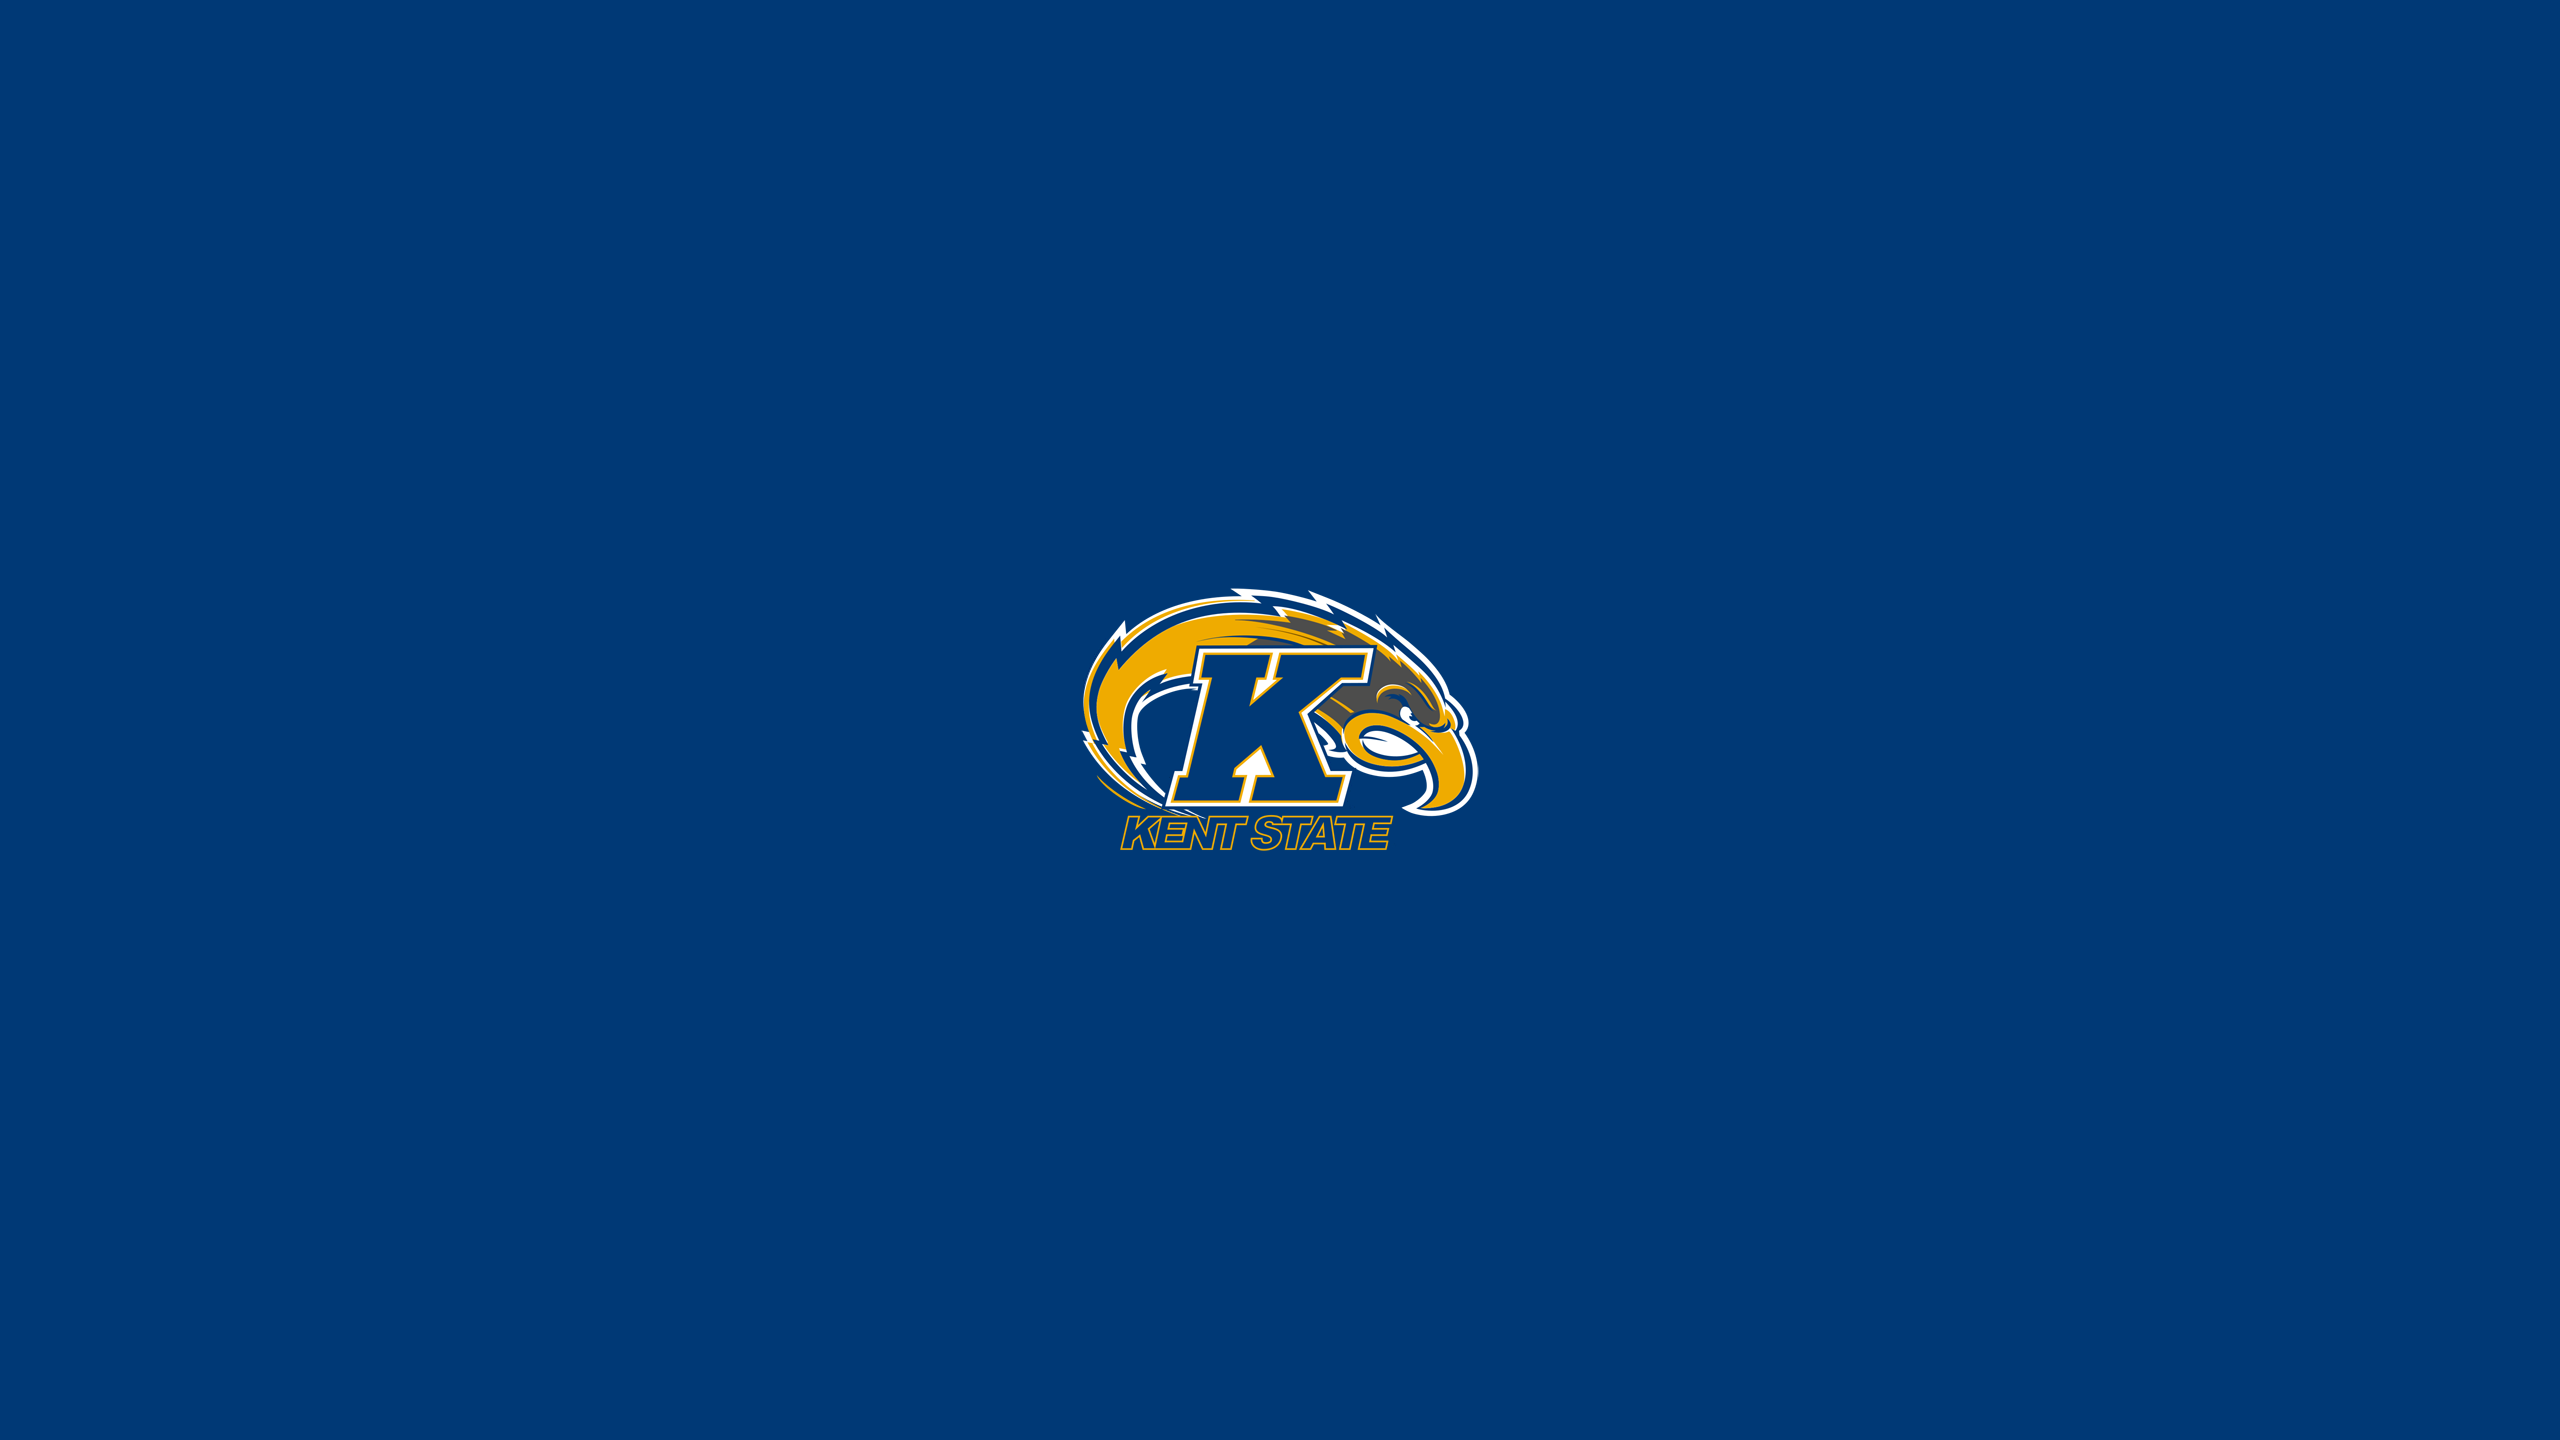 Kent State Golden Flashes Basketball - NCAAB - Square Bettor